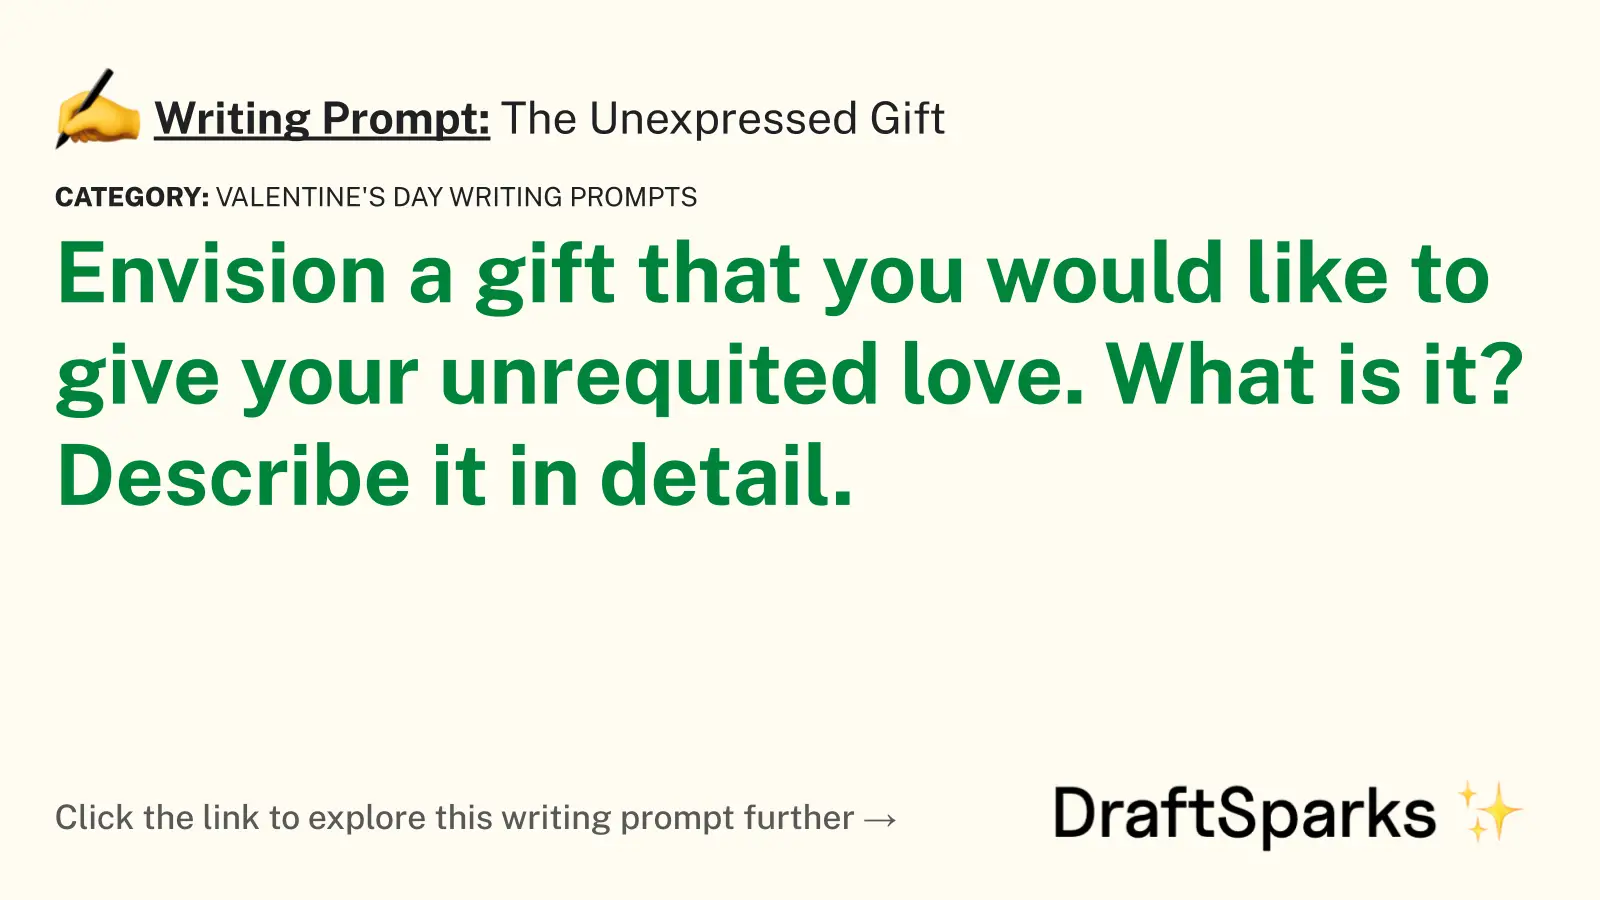 The Unexpressed Gift